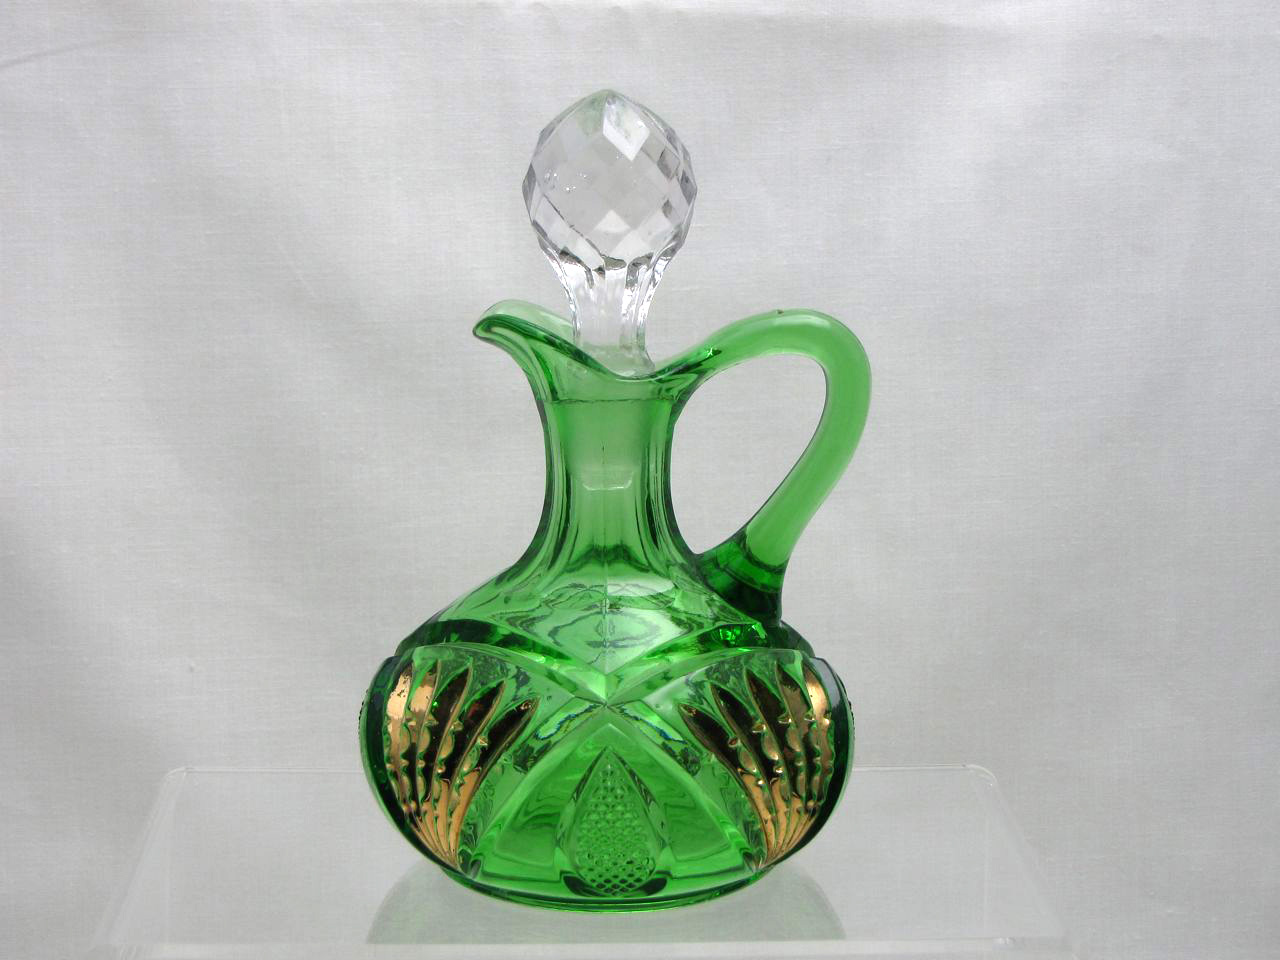 Heisey #1255 Pineapple and Fan, Oil Bottle, Emerald with gold decoration